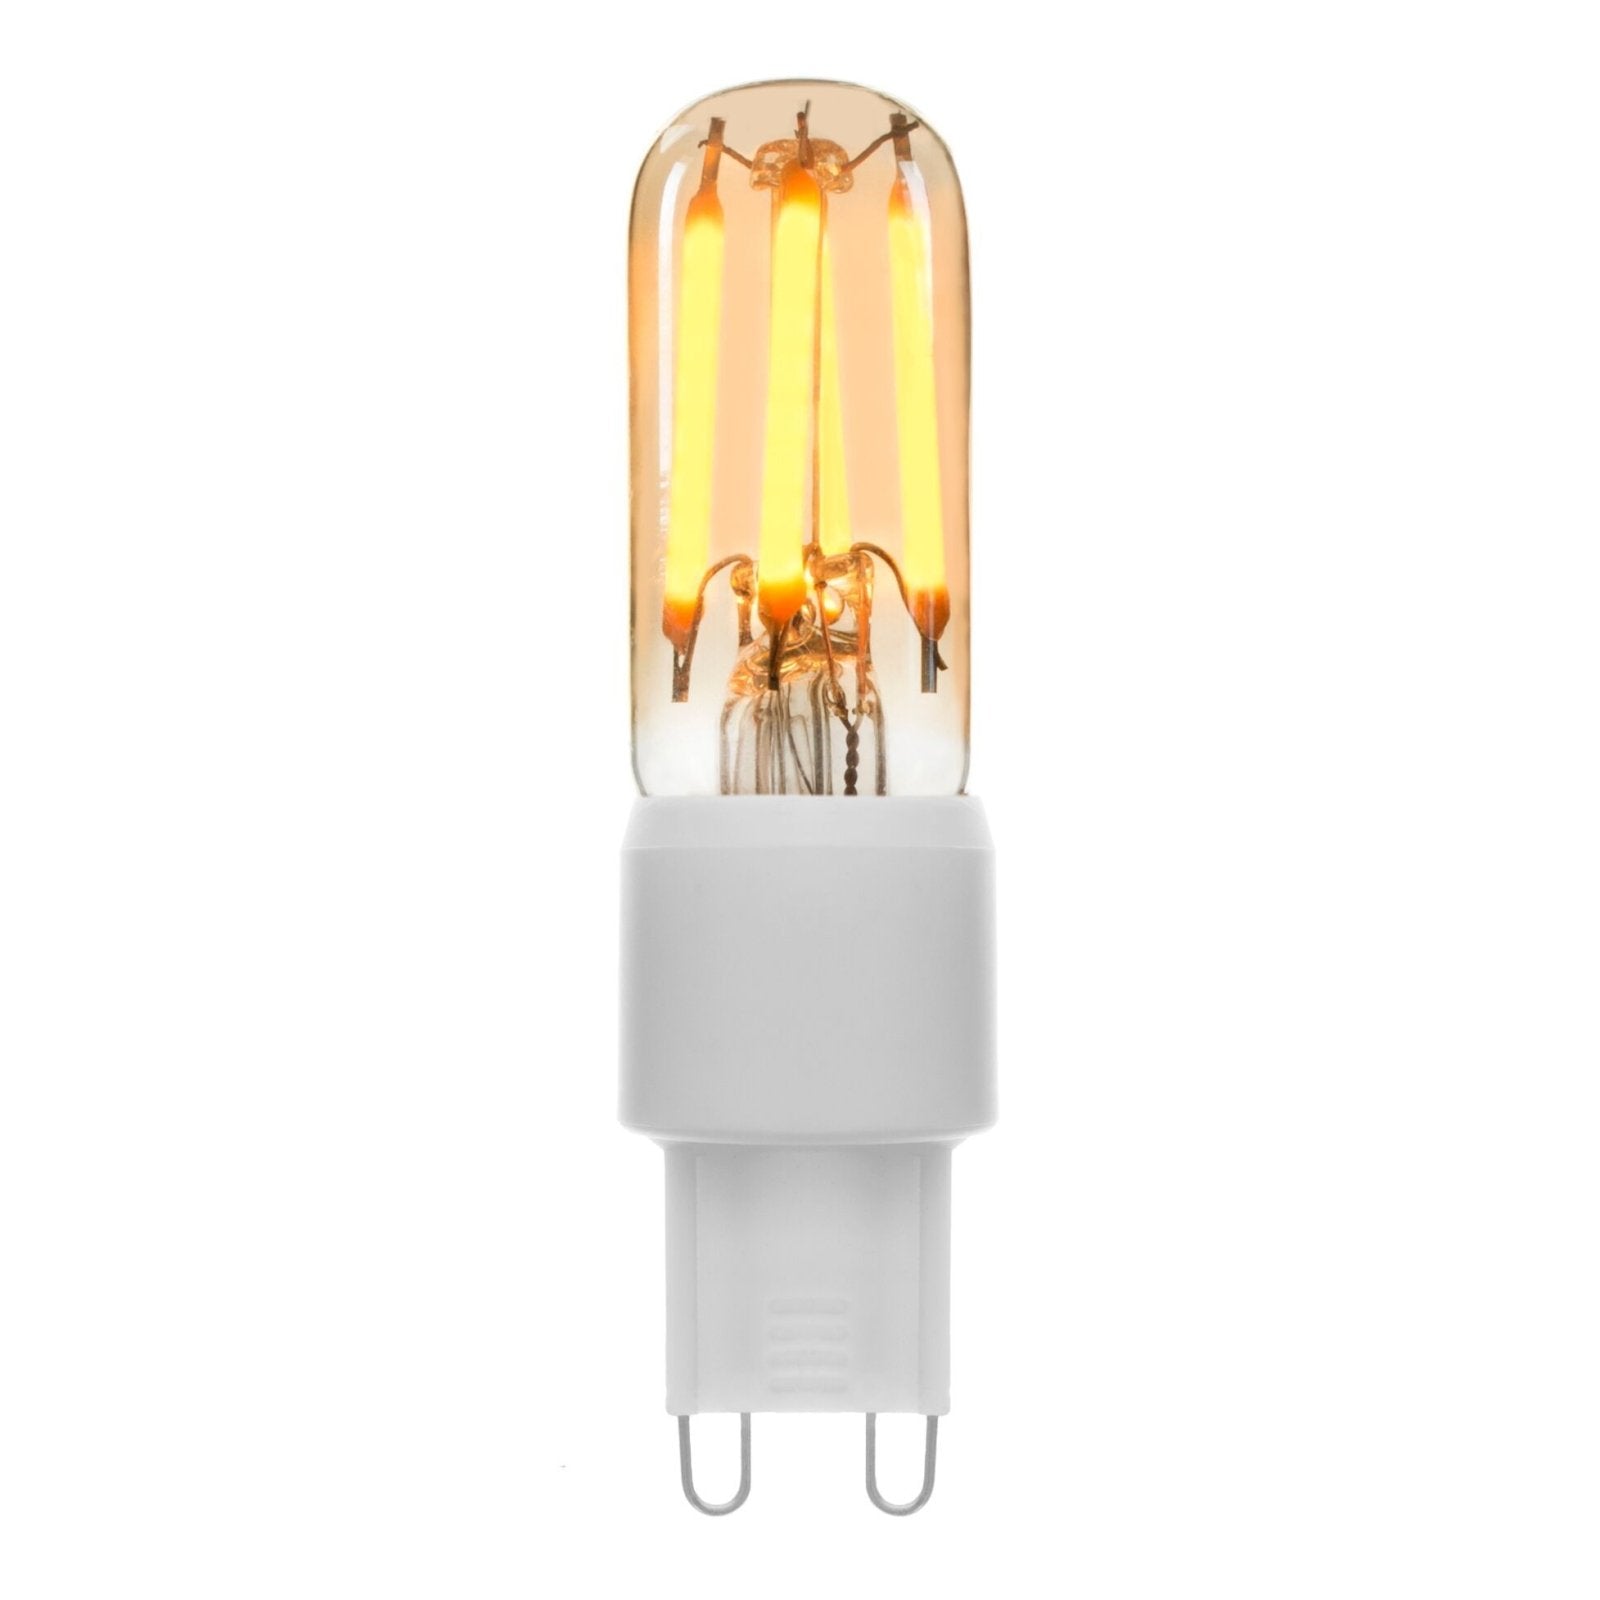 G9 Amber 3W 2200K - LED Lamp from RETROLIGHT. Made by Zico Lighting.